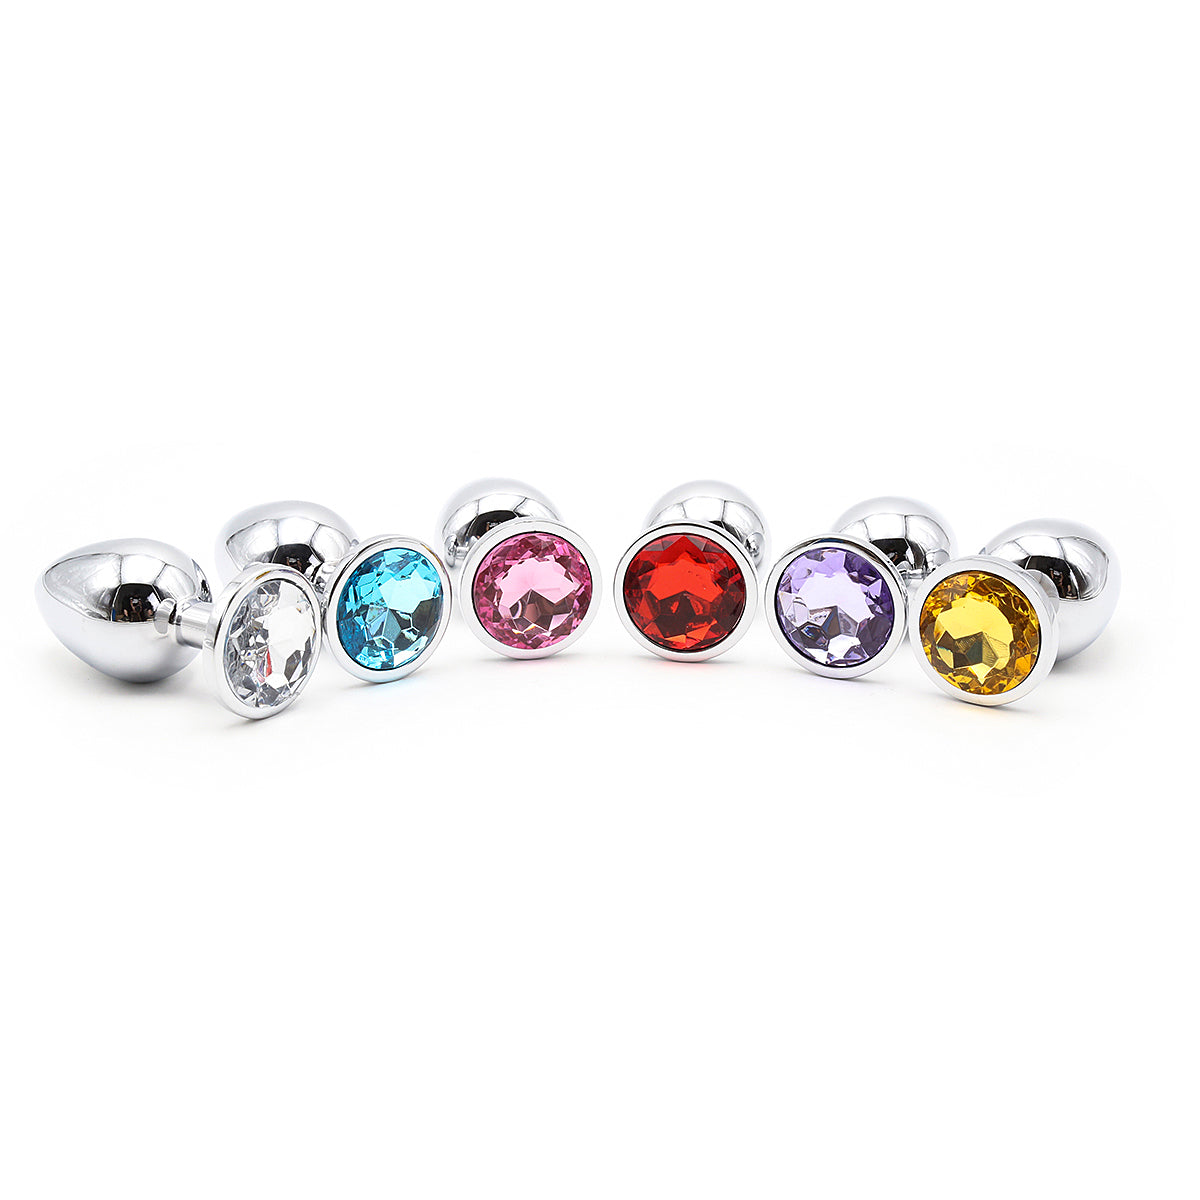 Small Size Stainless Metal Butt Plug(Six Colors Available)